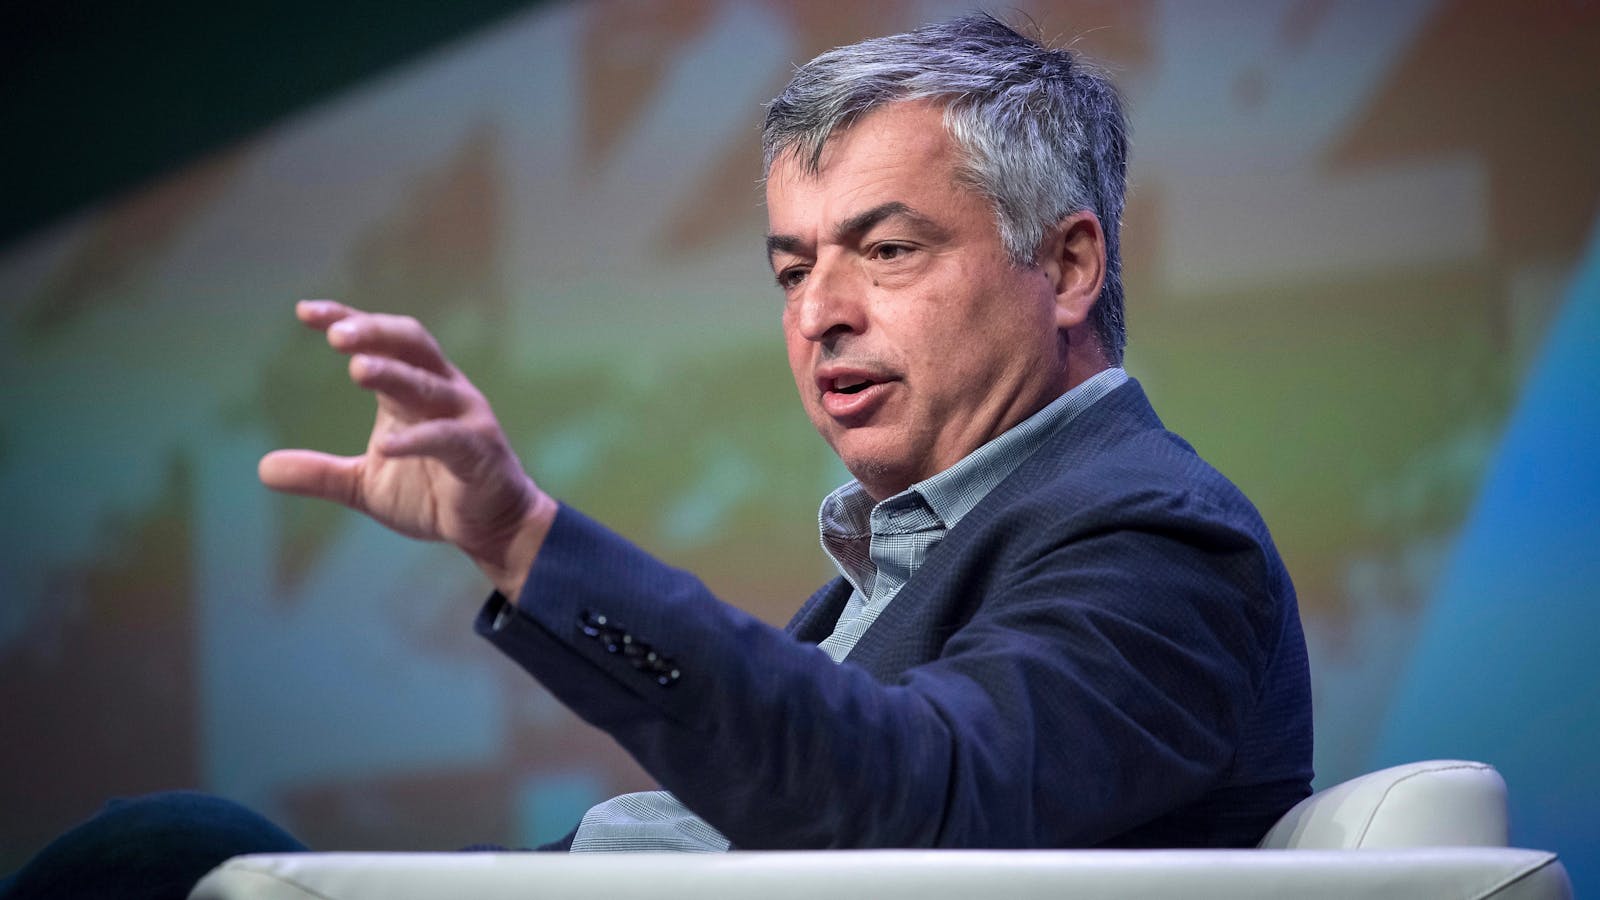 Apple's software and services chief Eddy Cue, whose team will oversee the video service. Photo by Bloomberg